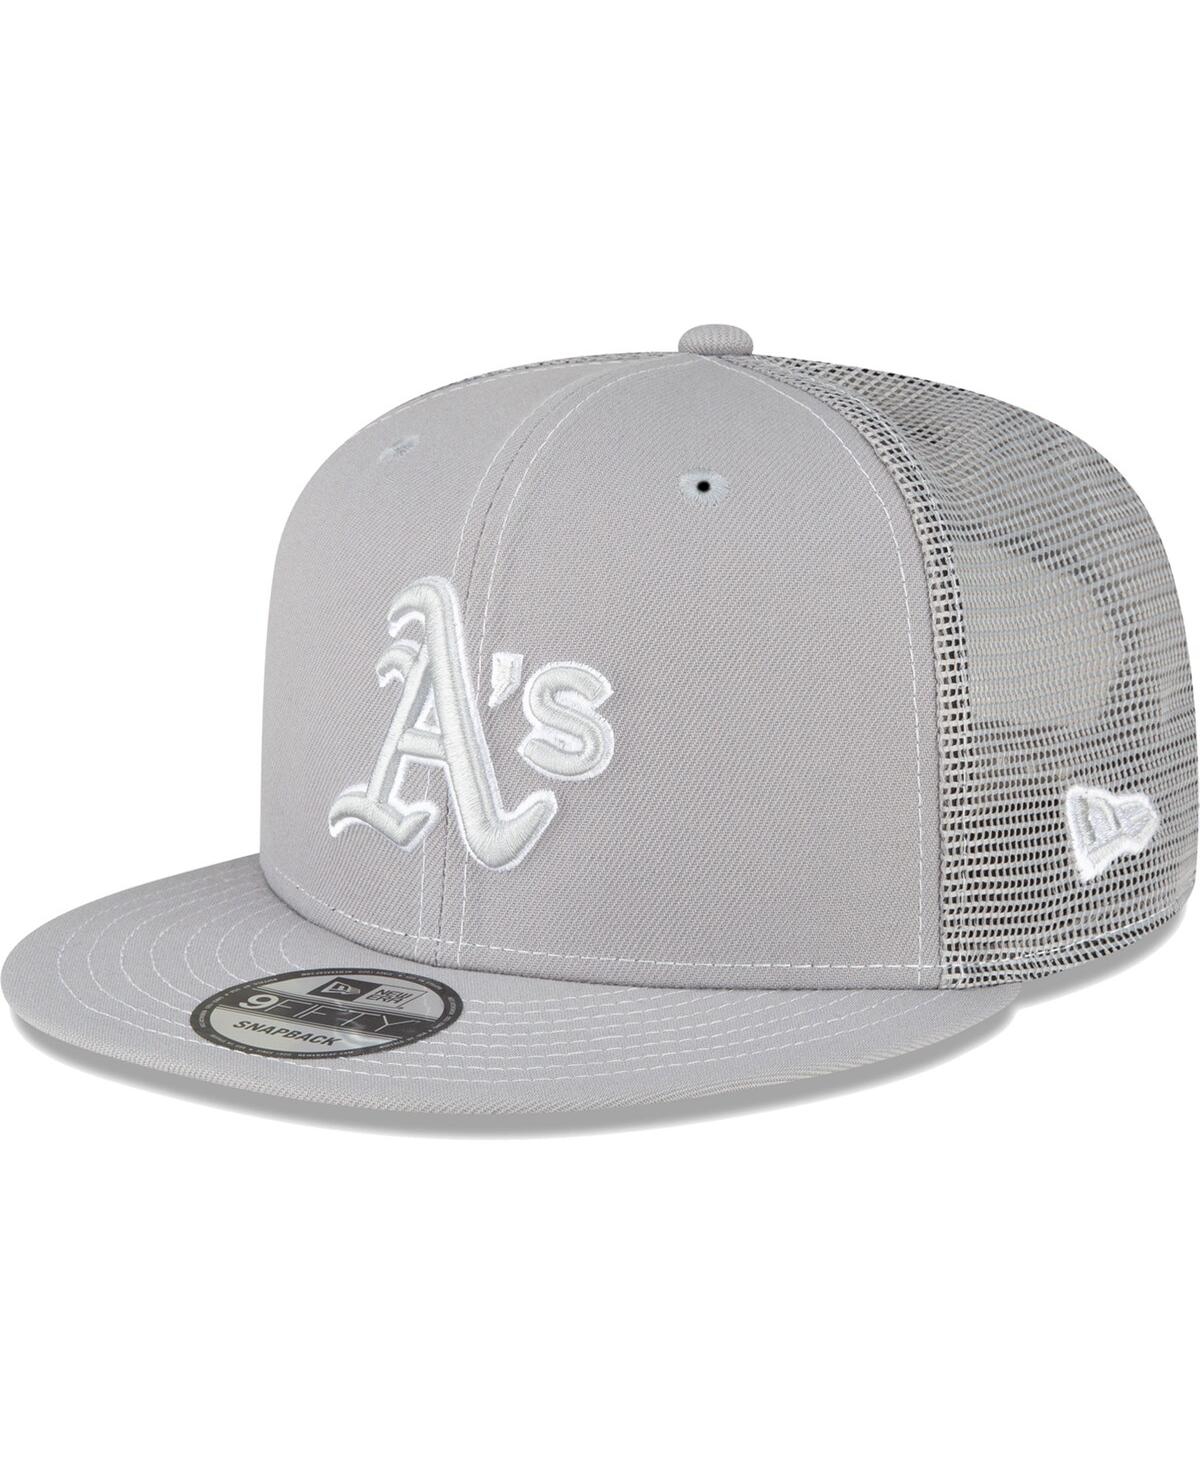 Oakland Athletics Independence Day 2023 9FIFTY Snapback Hat, Red, MLB by New Era